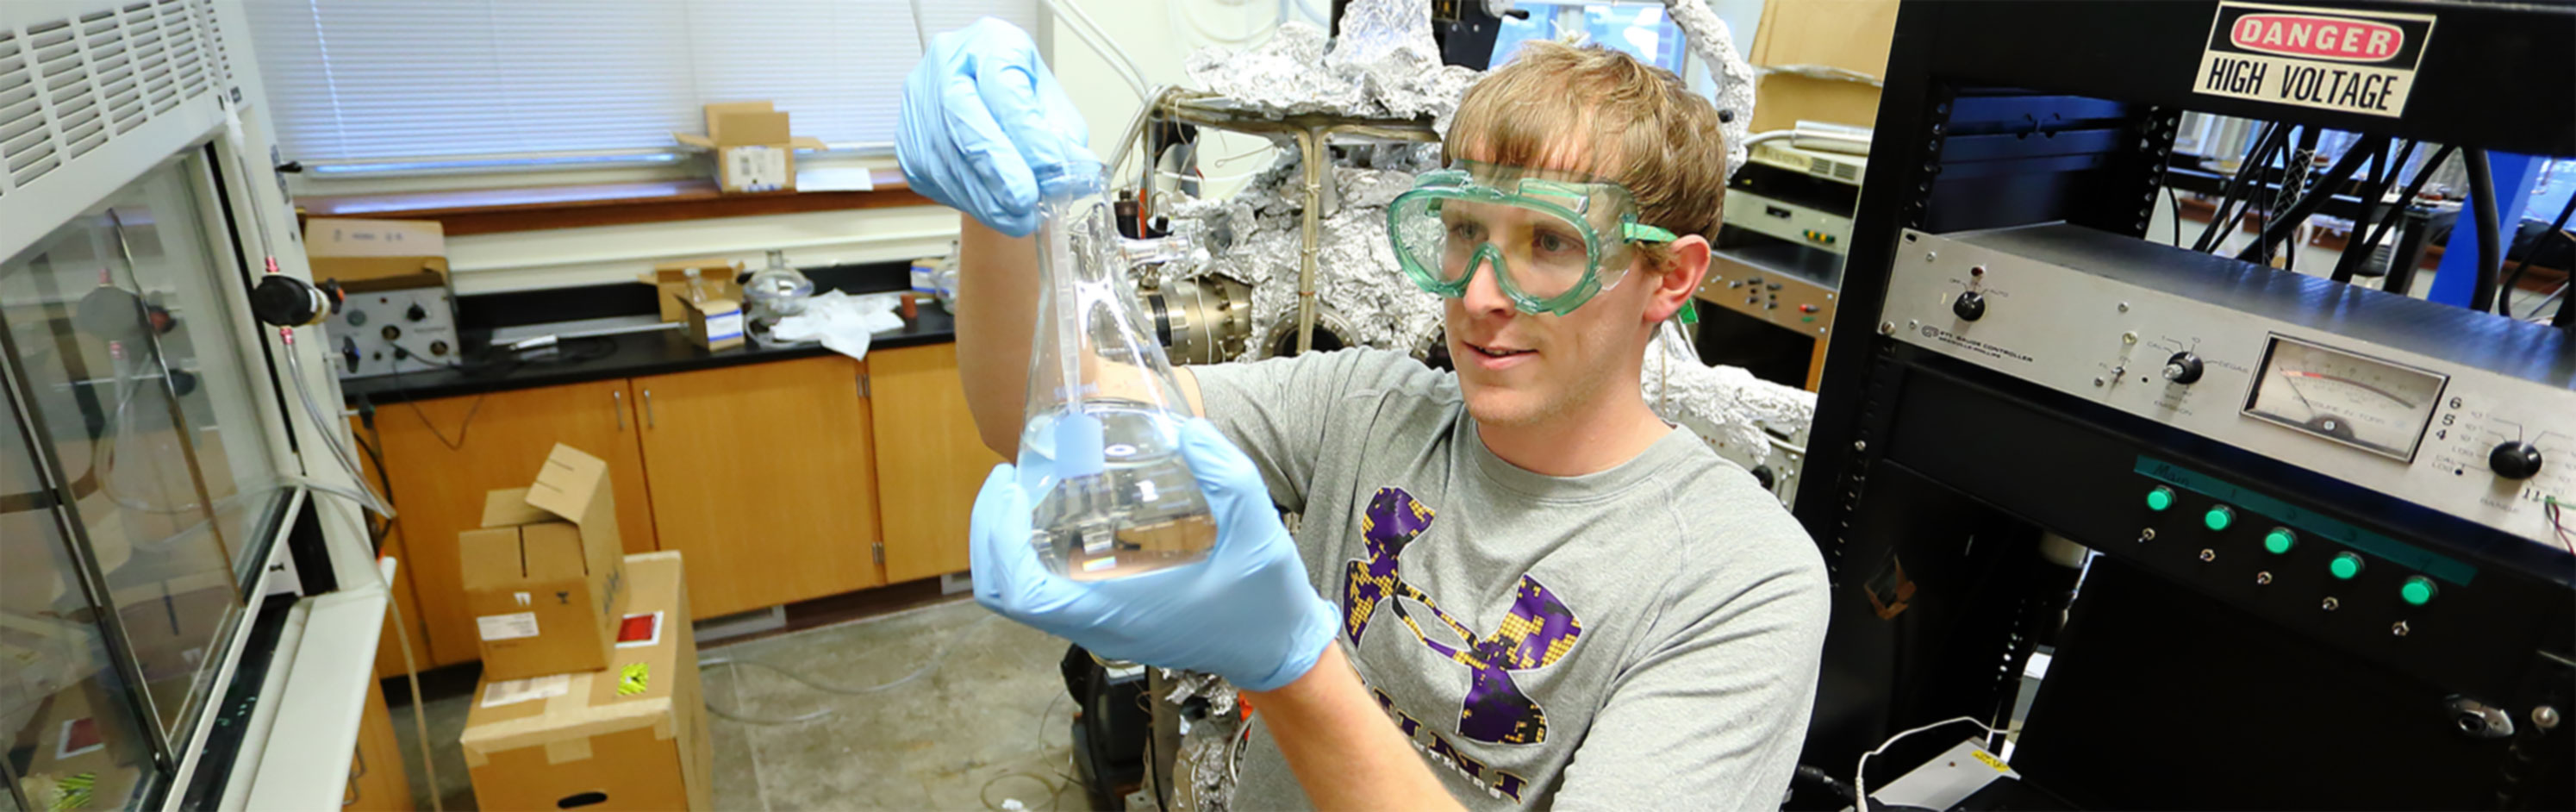 Student mixing chemicals in a beaker.